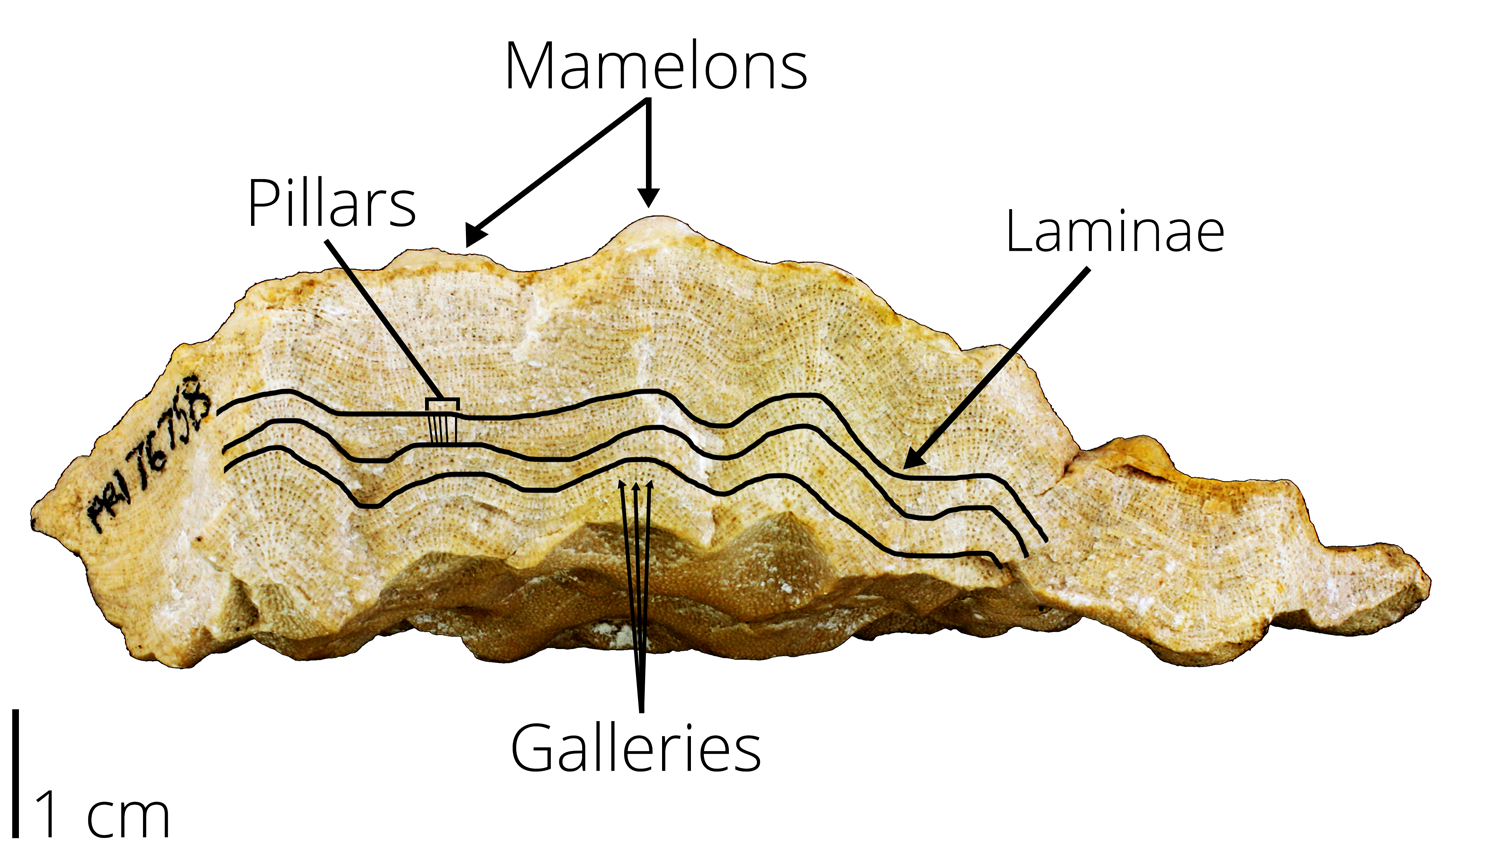 Diagram showing stromatoporoid features, including pillars, mamelons, galleries, and laminae